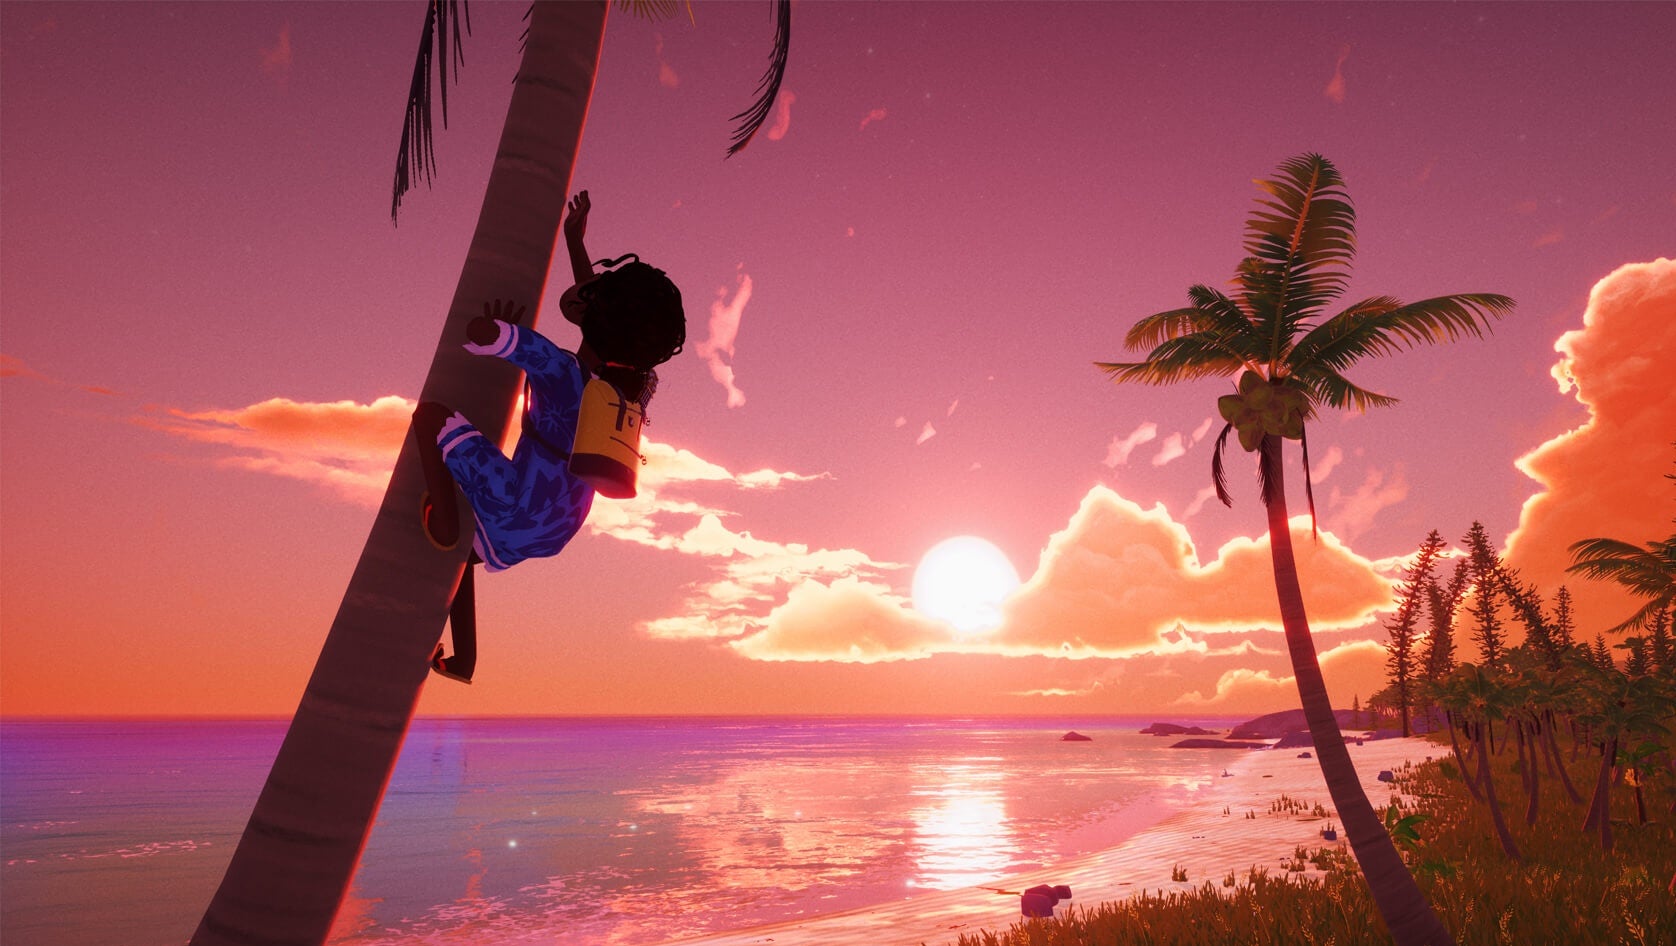 A screenshot of Tchia showing the protagonist climbing a tree near a beach against the background of a beautiful sunset.